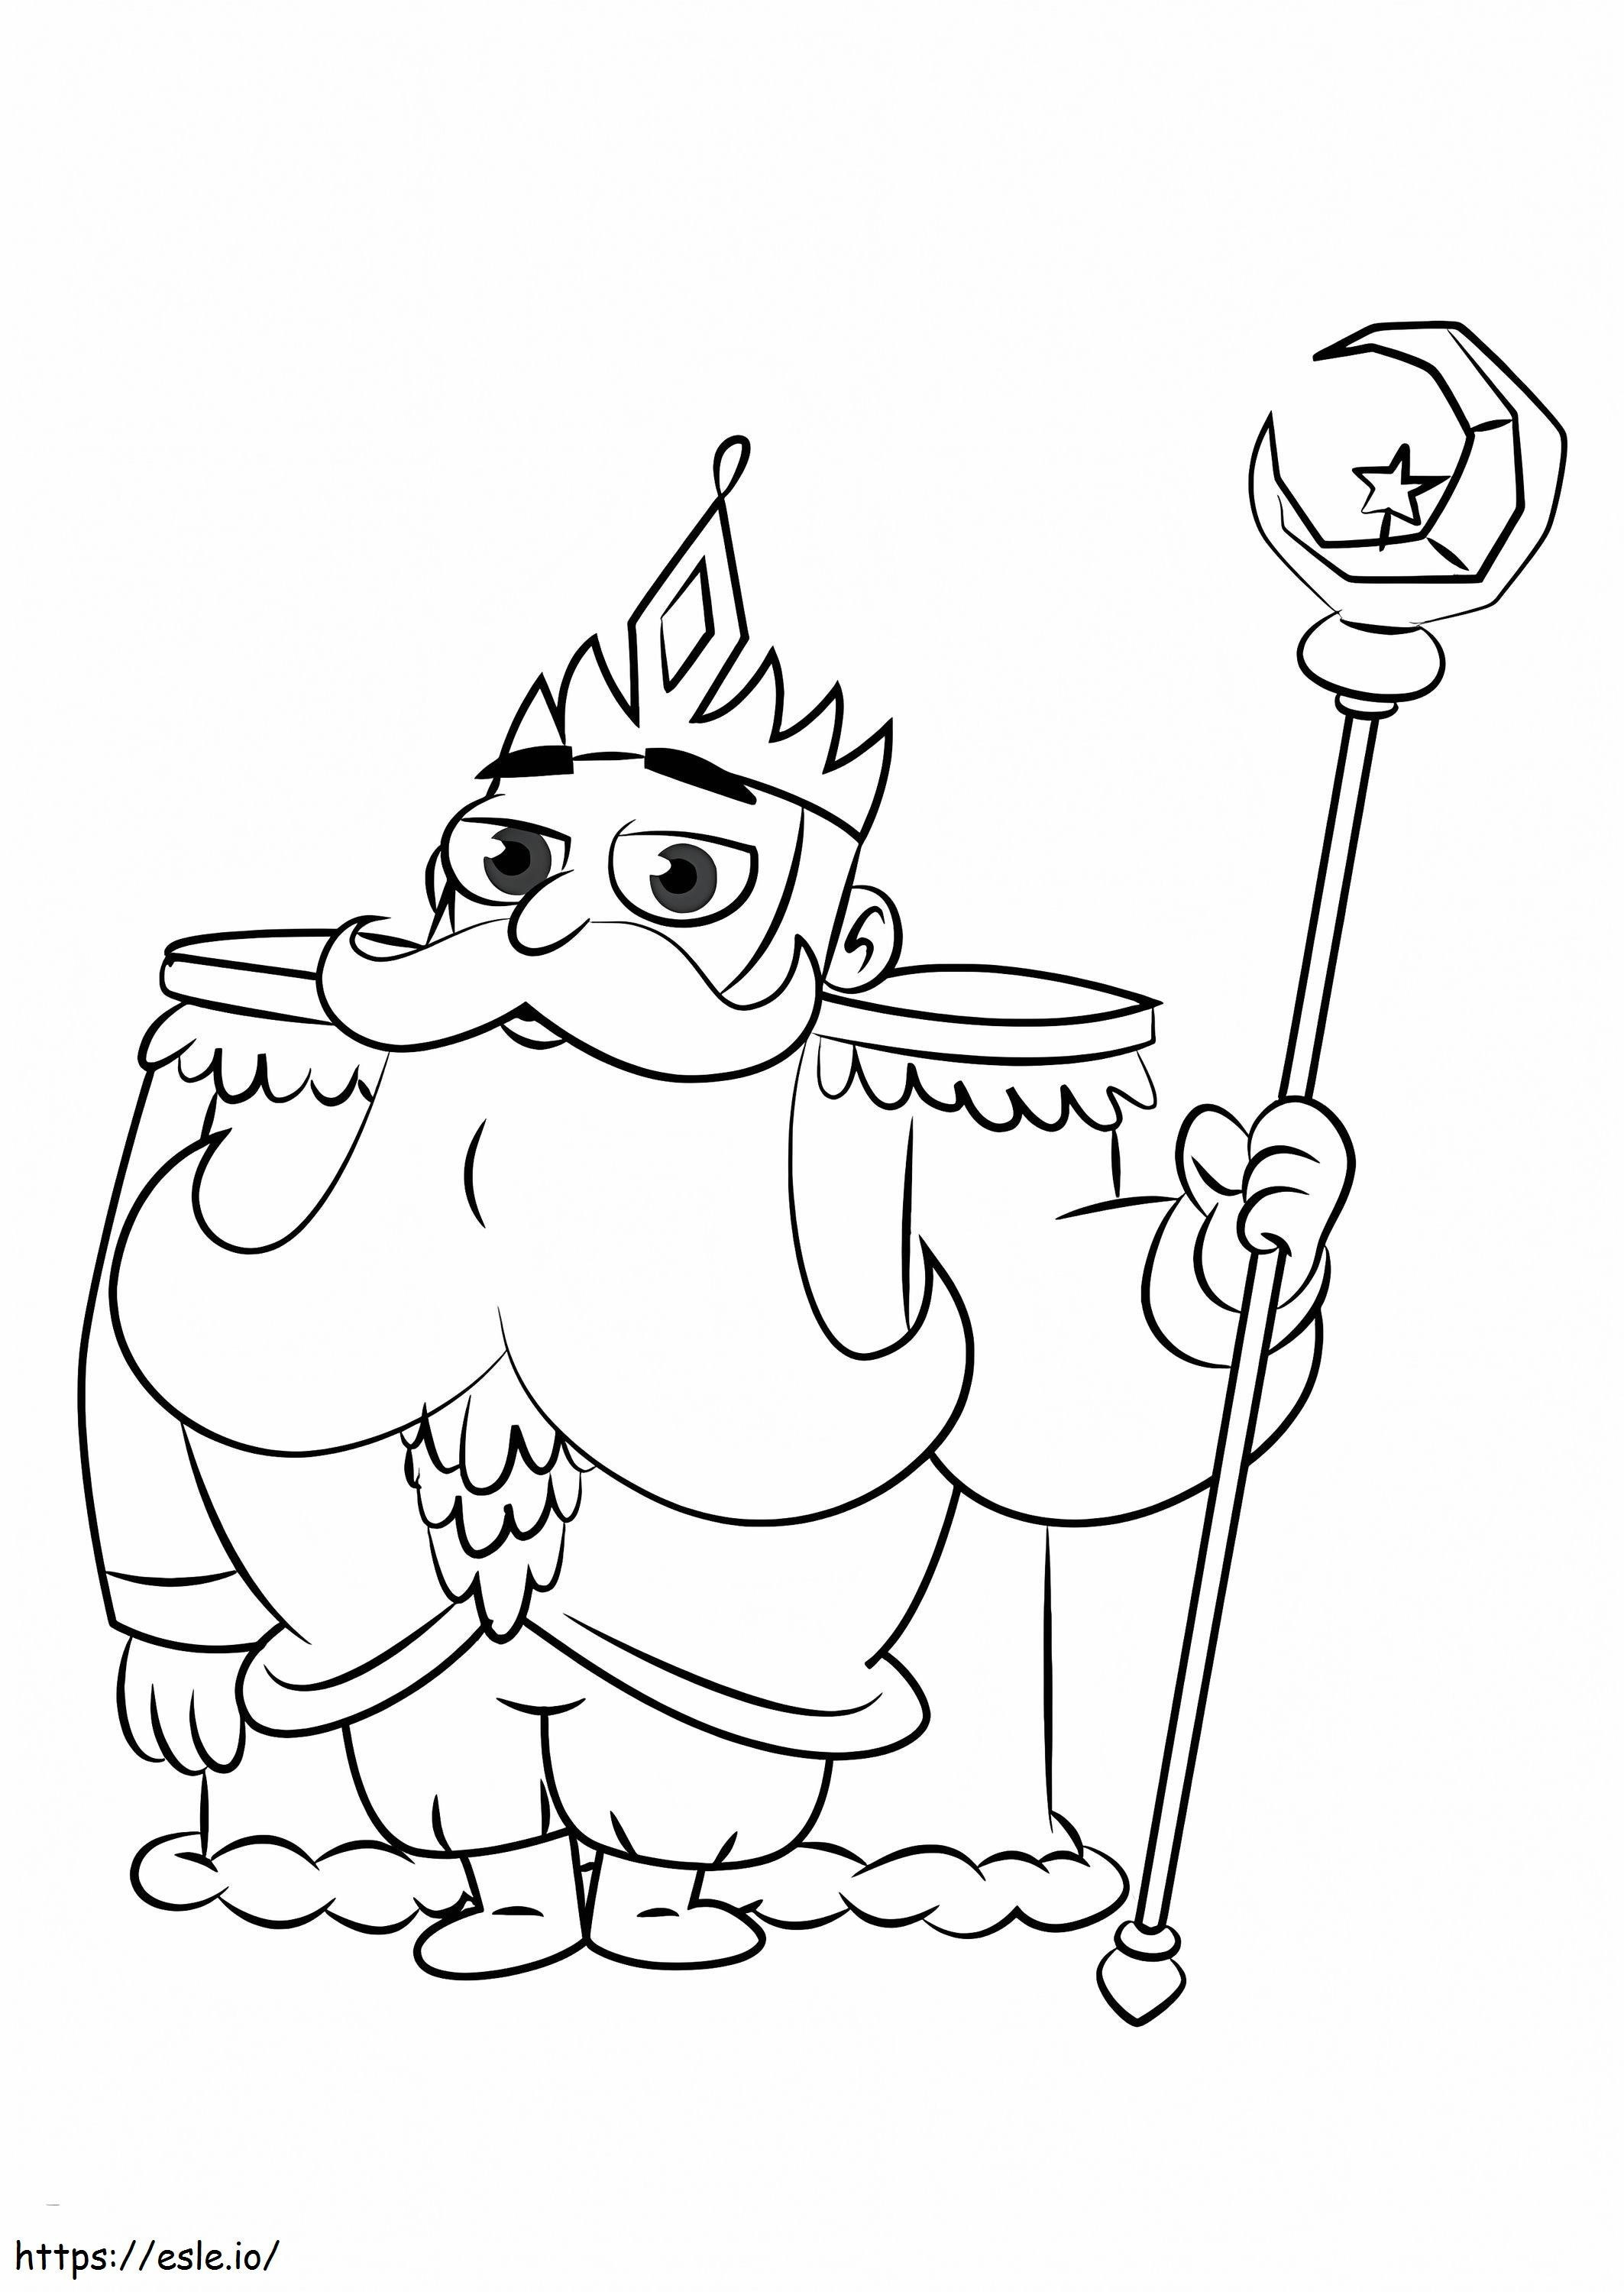 King Butterfly coloring page